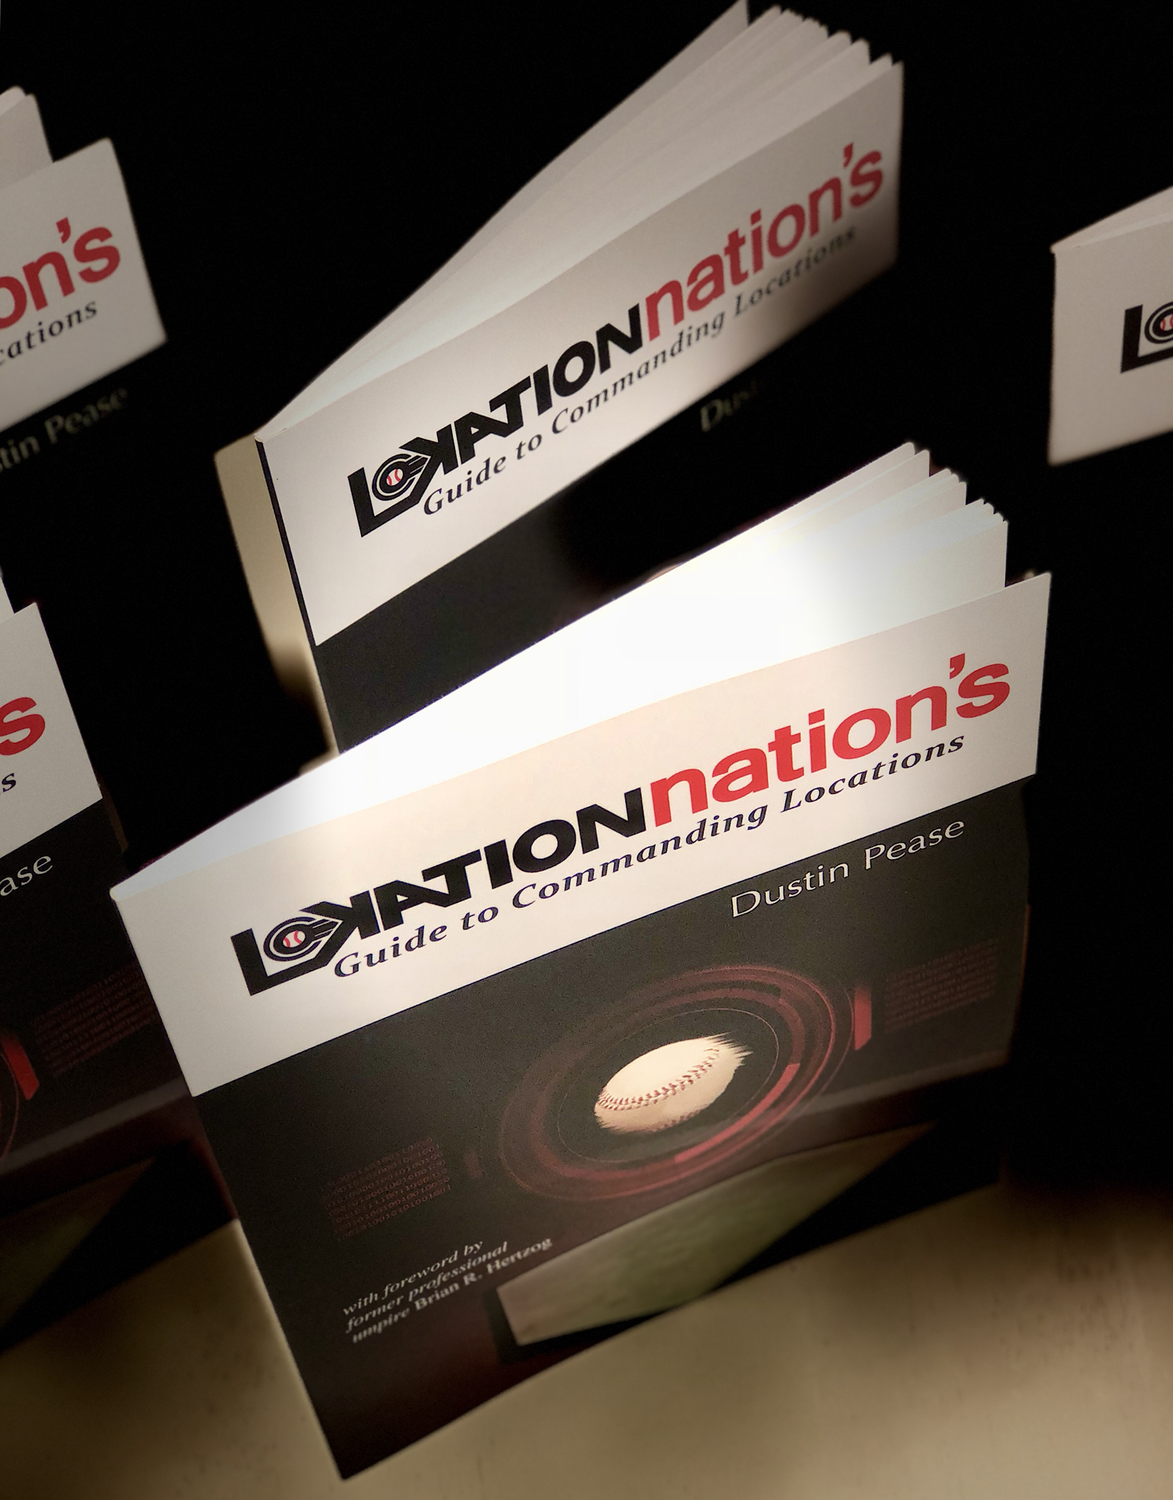 Lokation Nation's Guide to Commanding Locations - Downloadable Book with Bonus Video Content